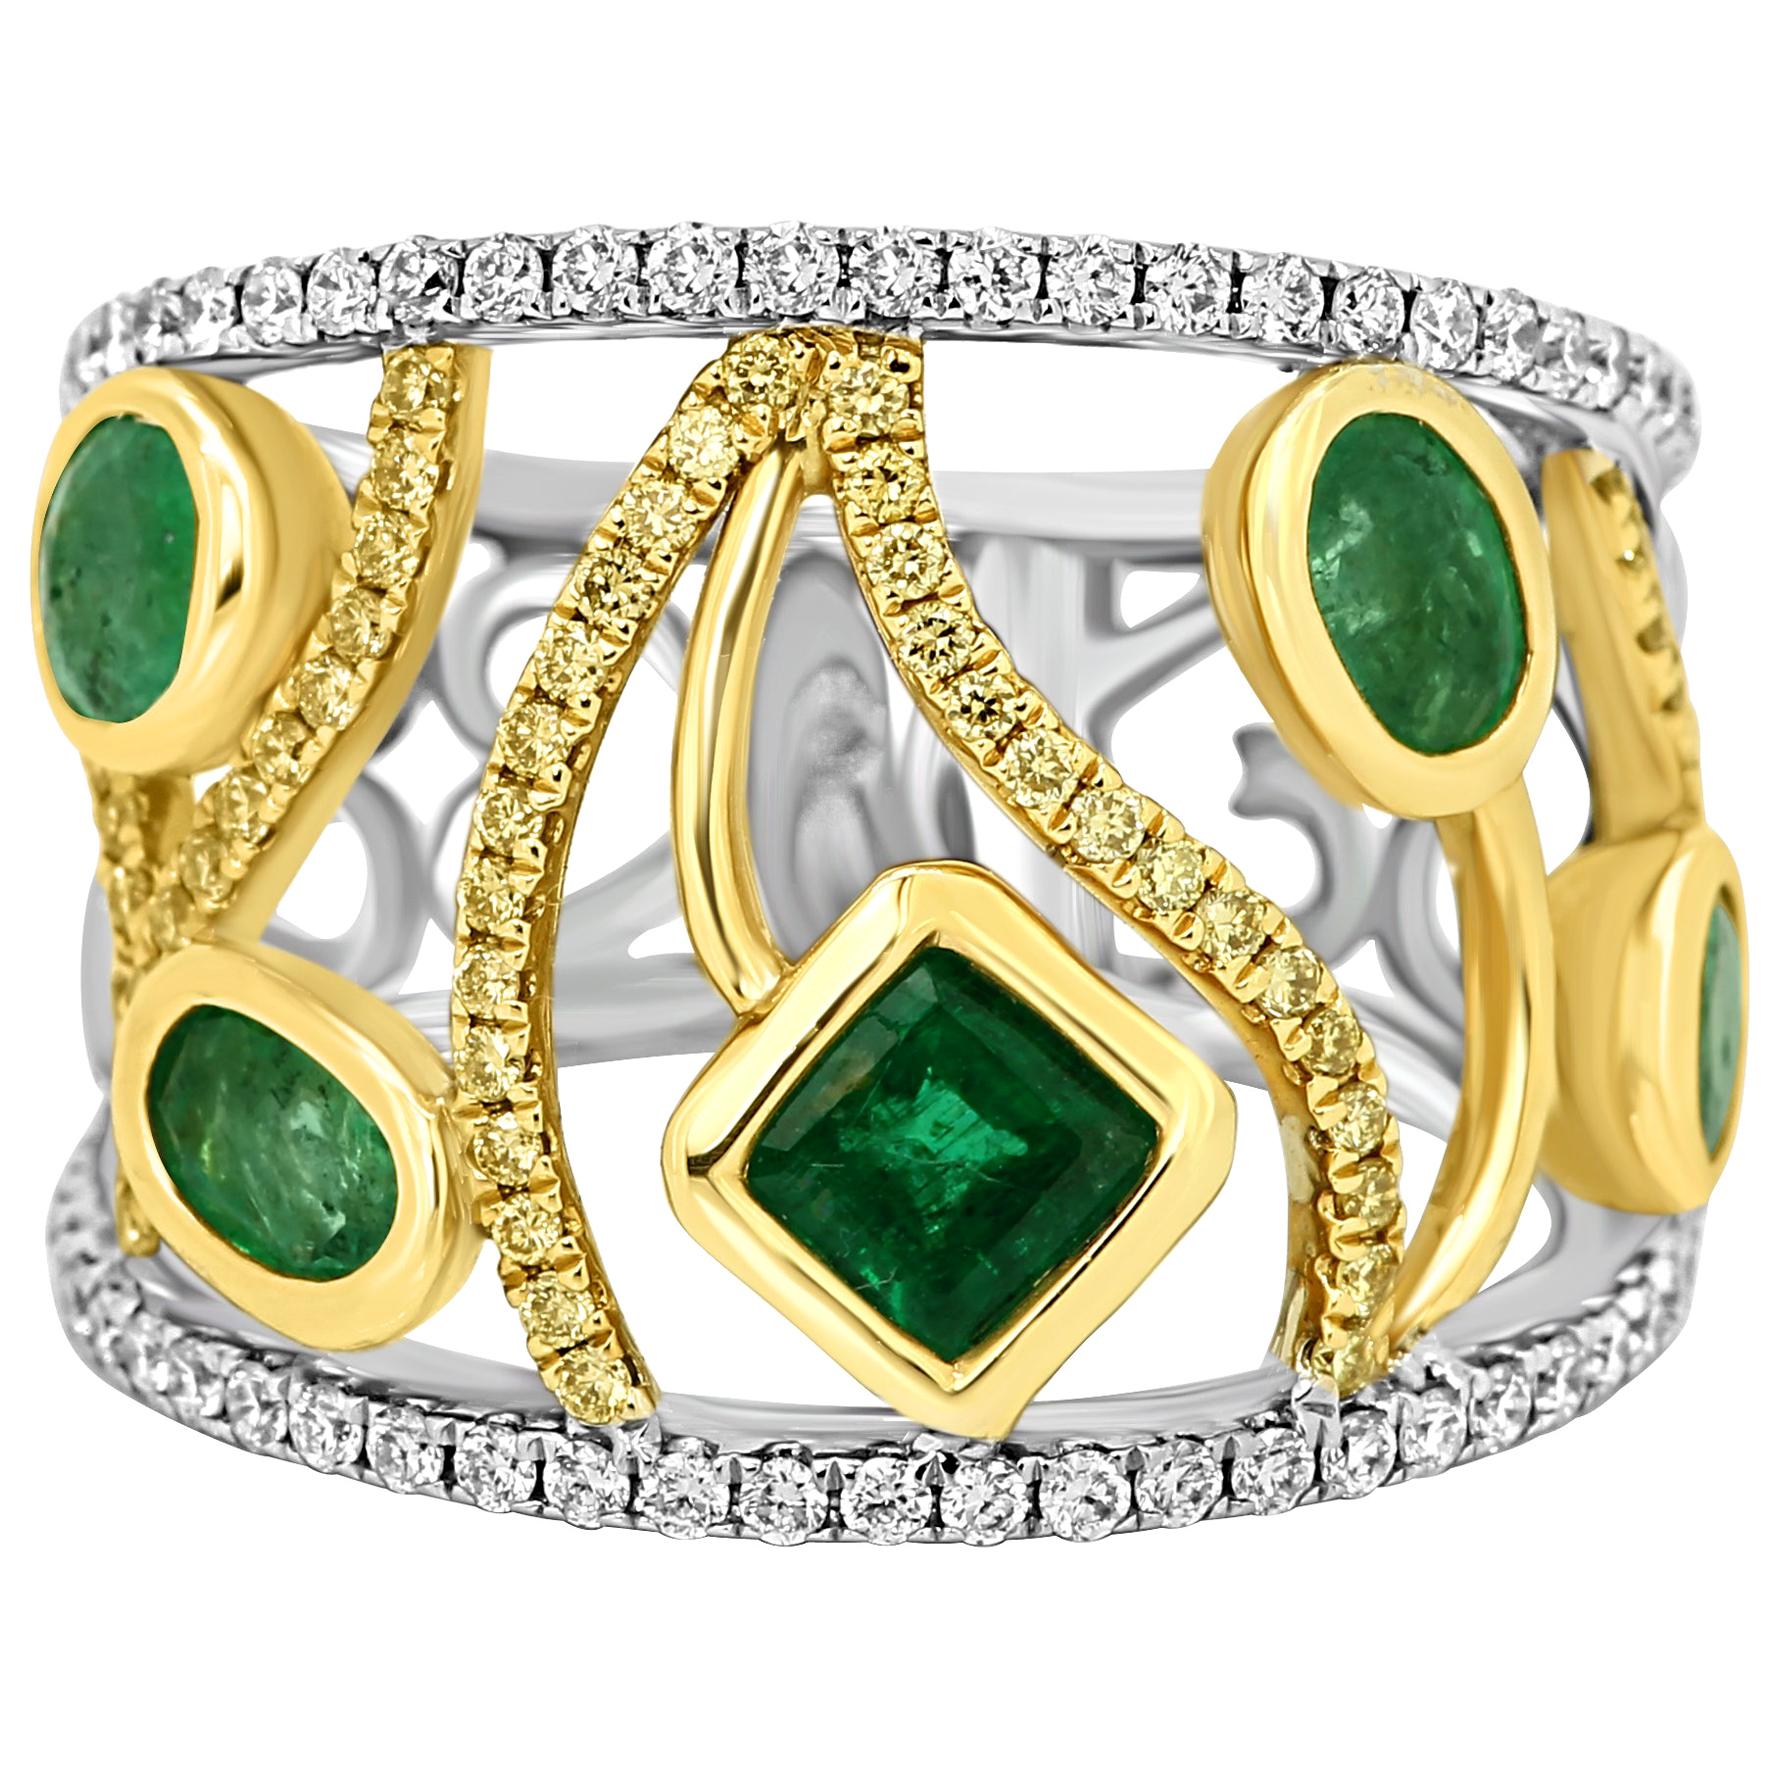 Emerald Fancy Yellow White Diamond Two-Color Gold Cocktail Fashion Band Ring